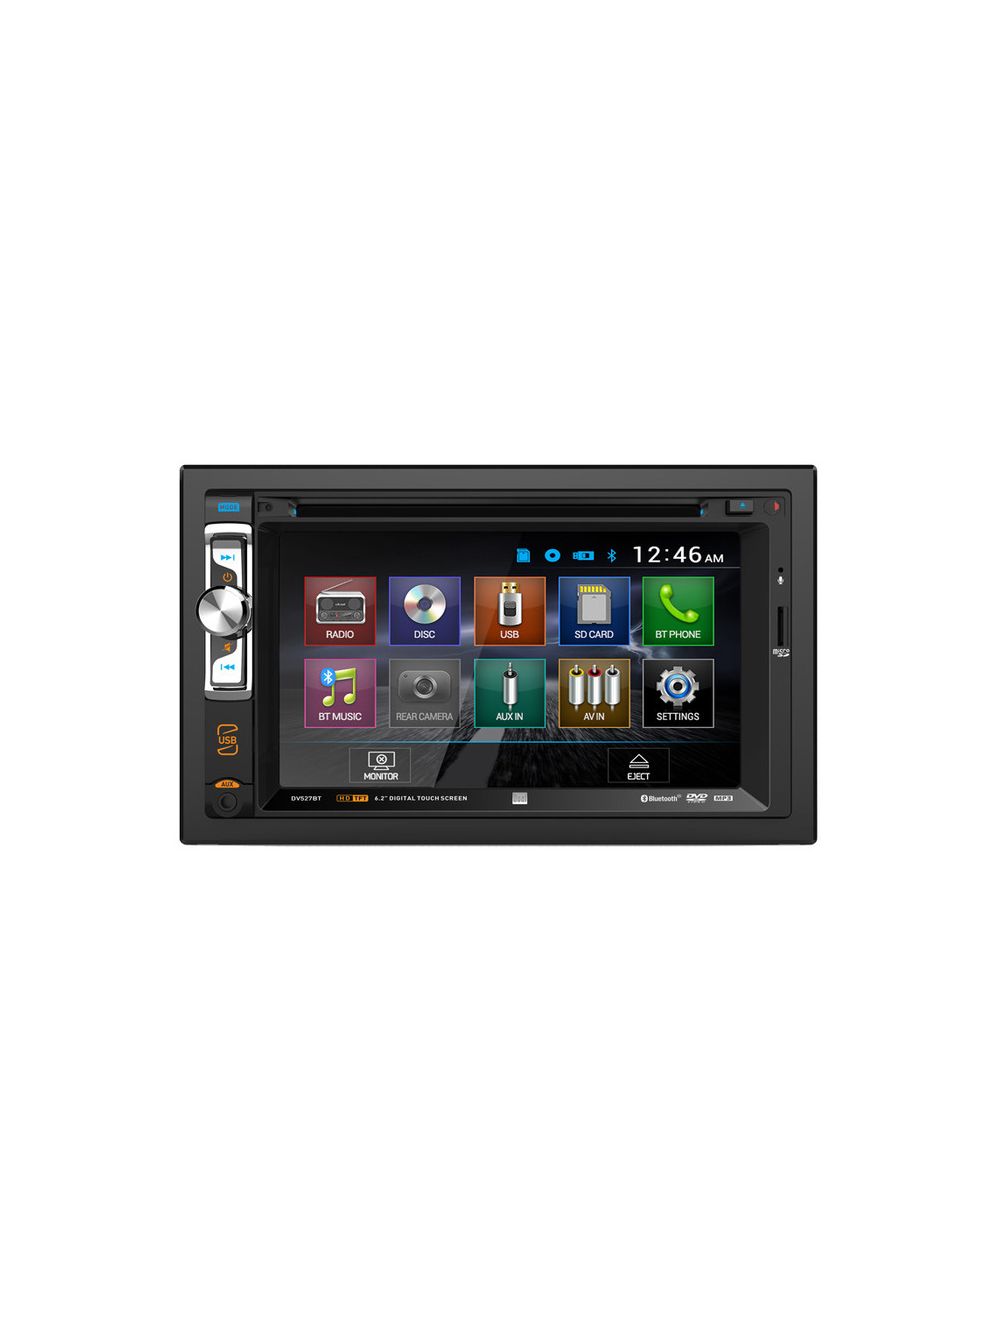 Dual Audio Video DV527BT DVD MultiMedia Receiver with HD 6.2" Display